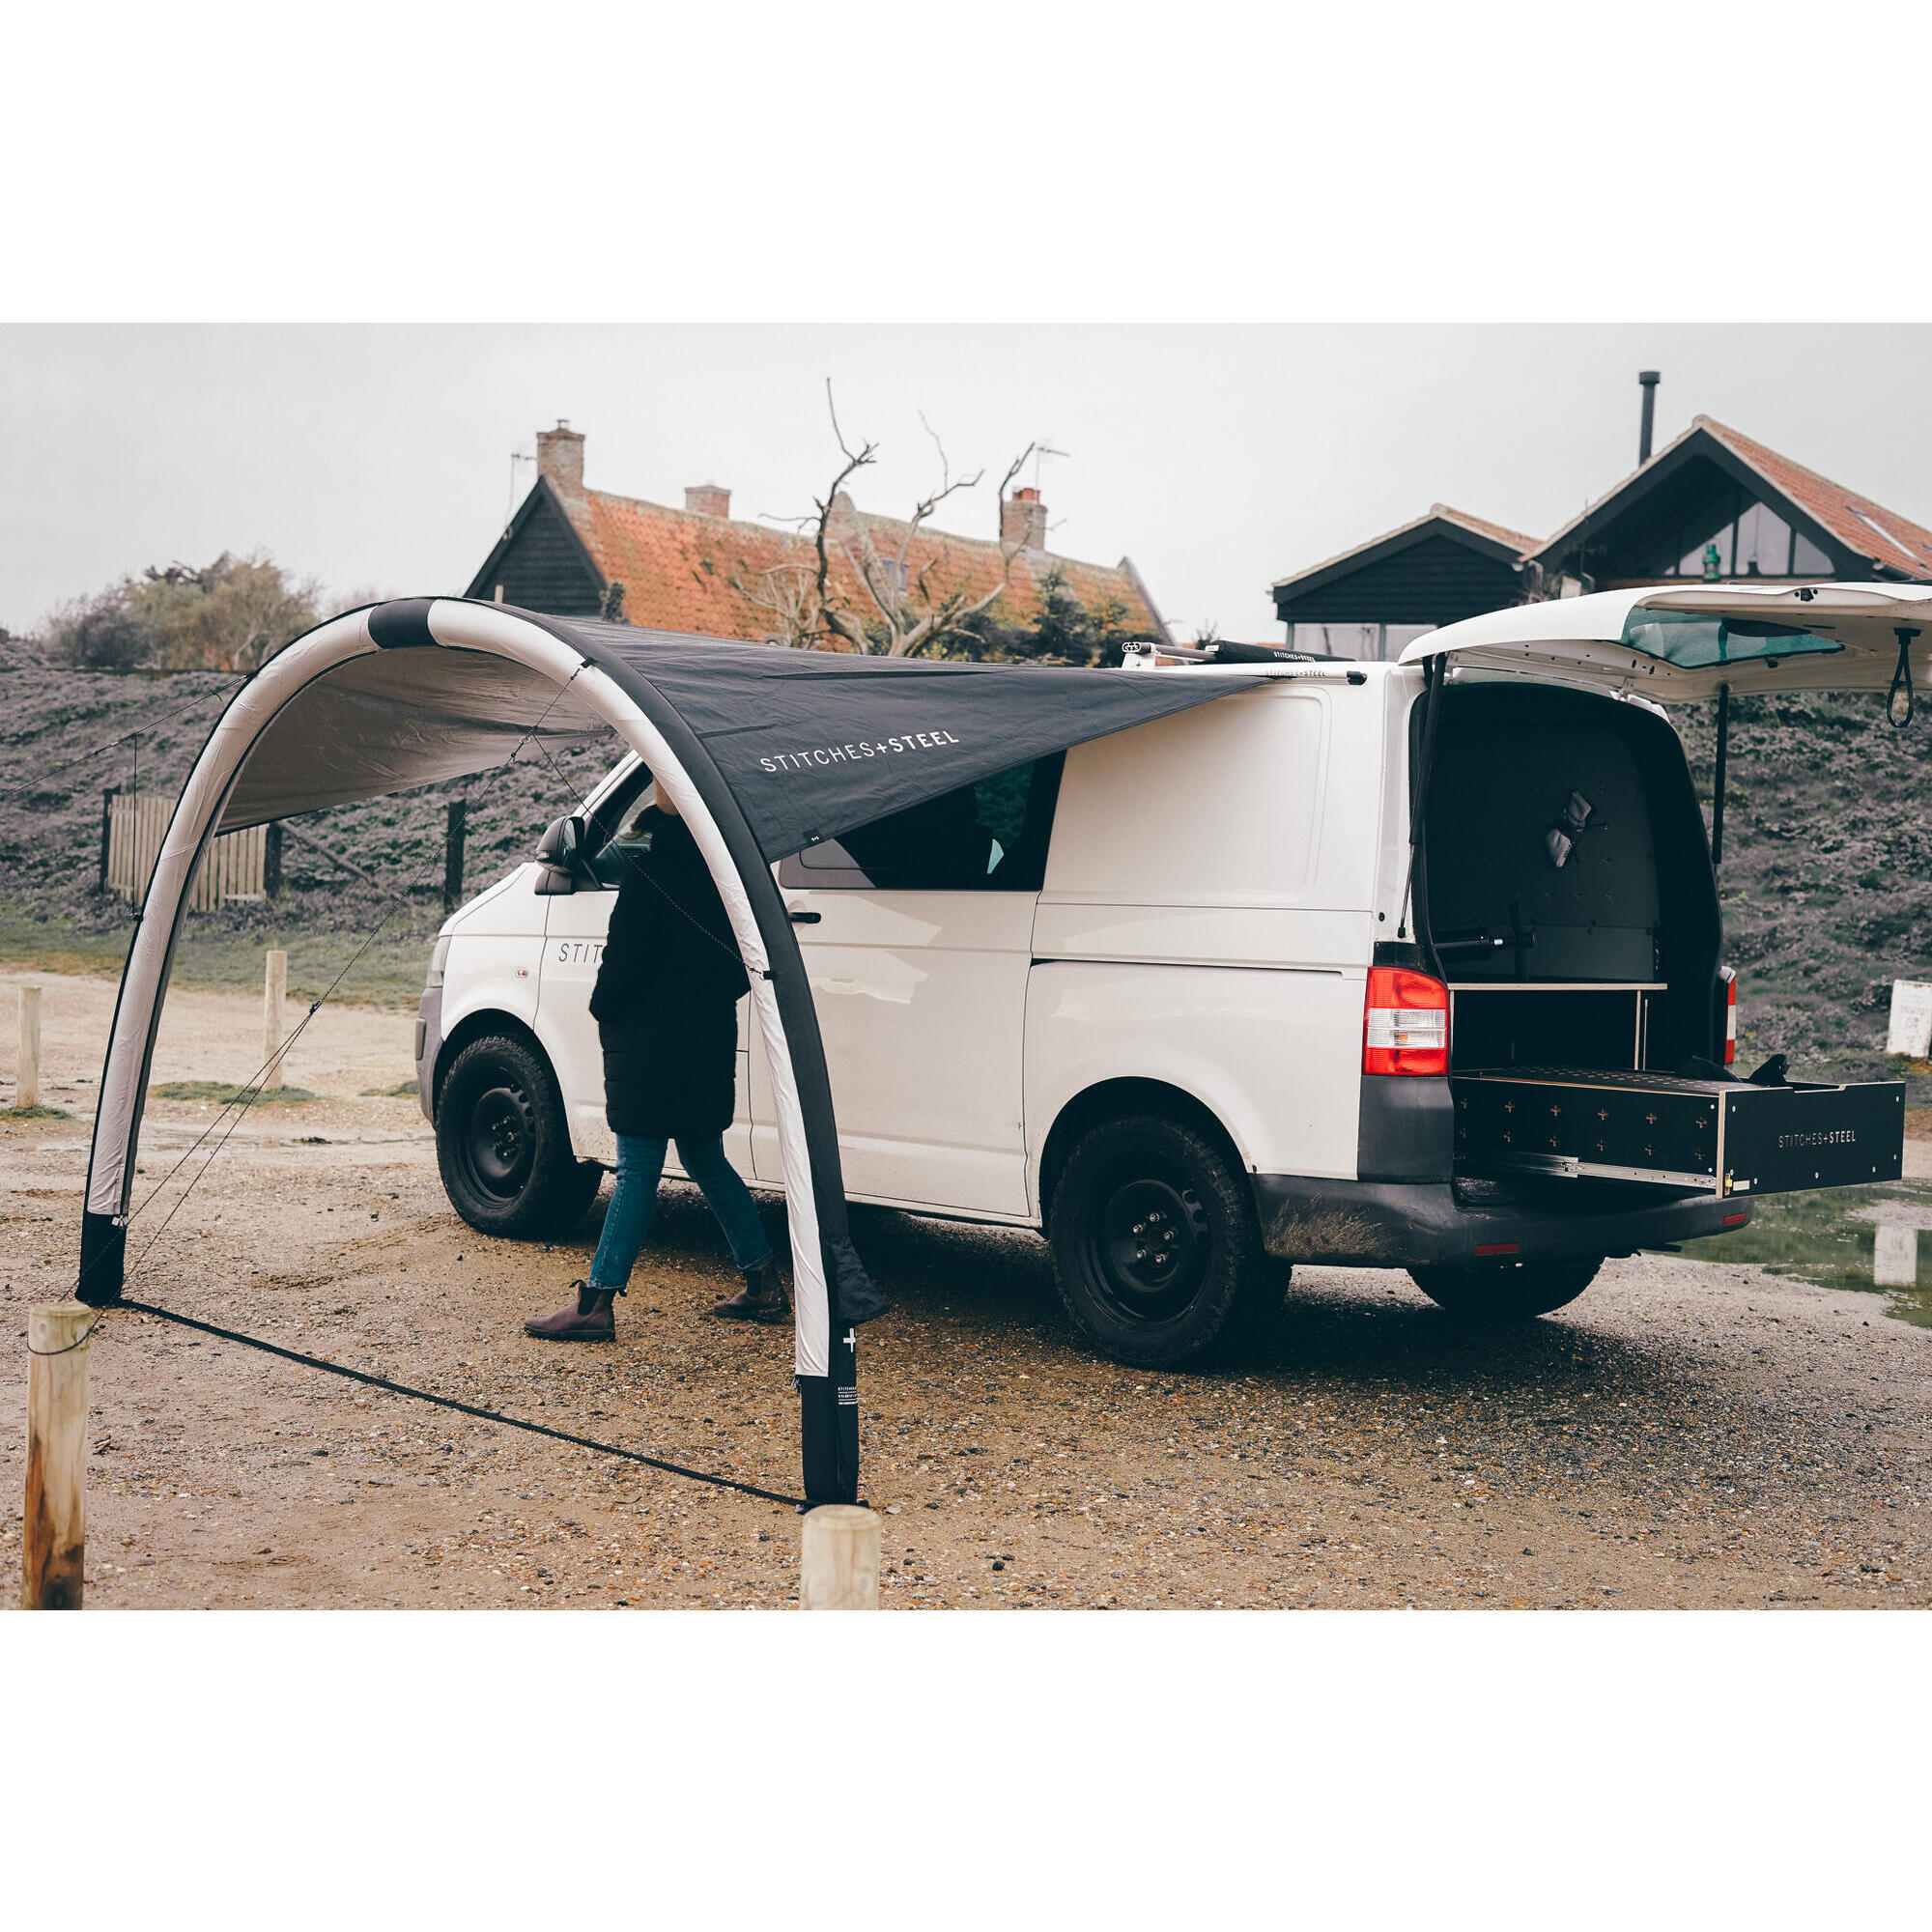 STITCHES & STEEL Bawdsey Inflatable Awning